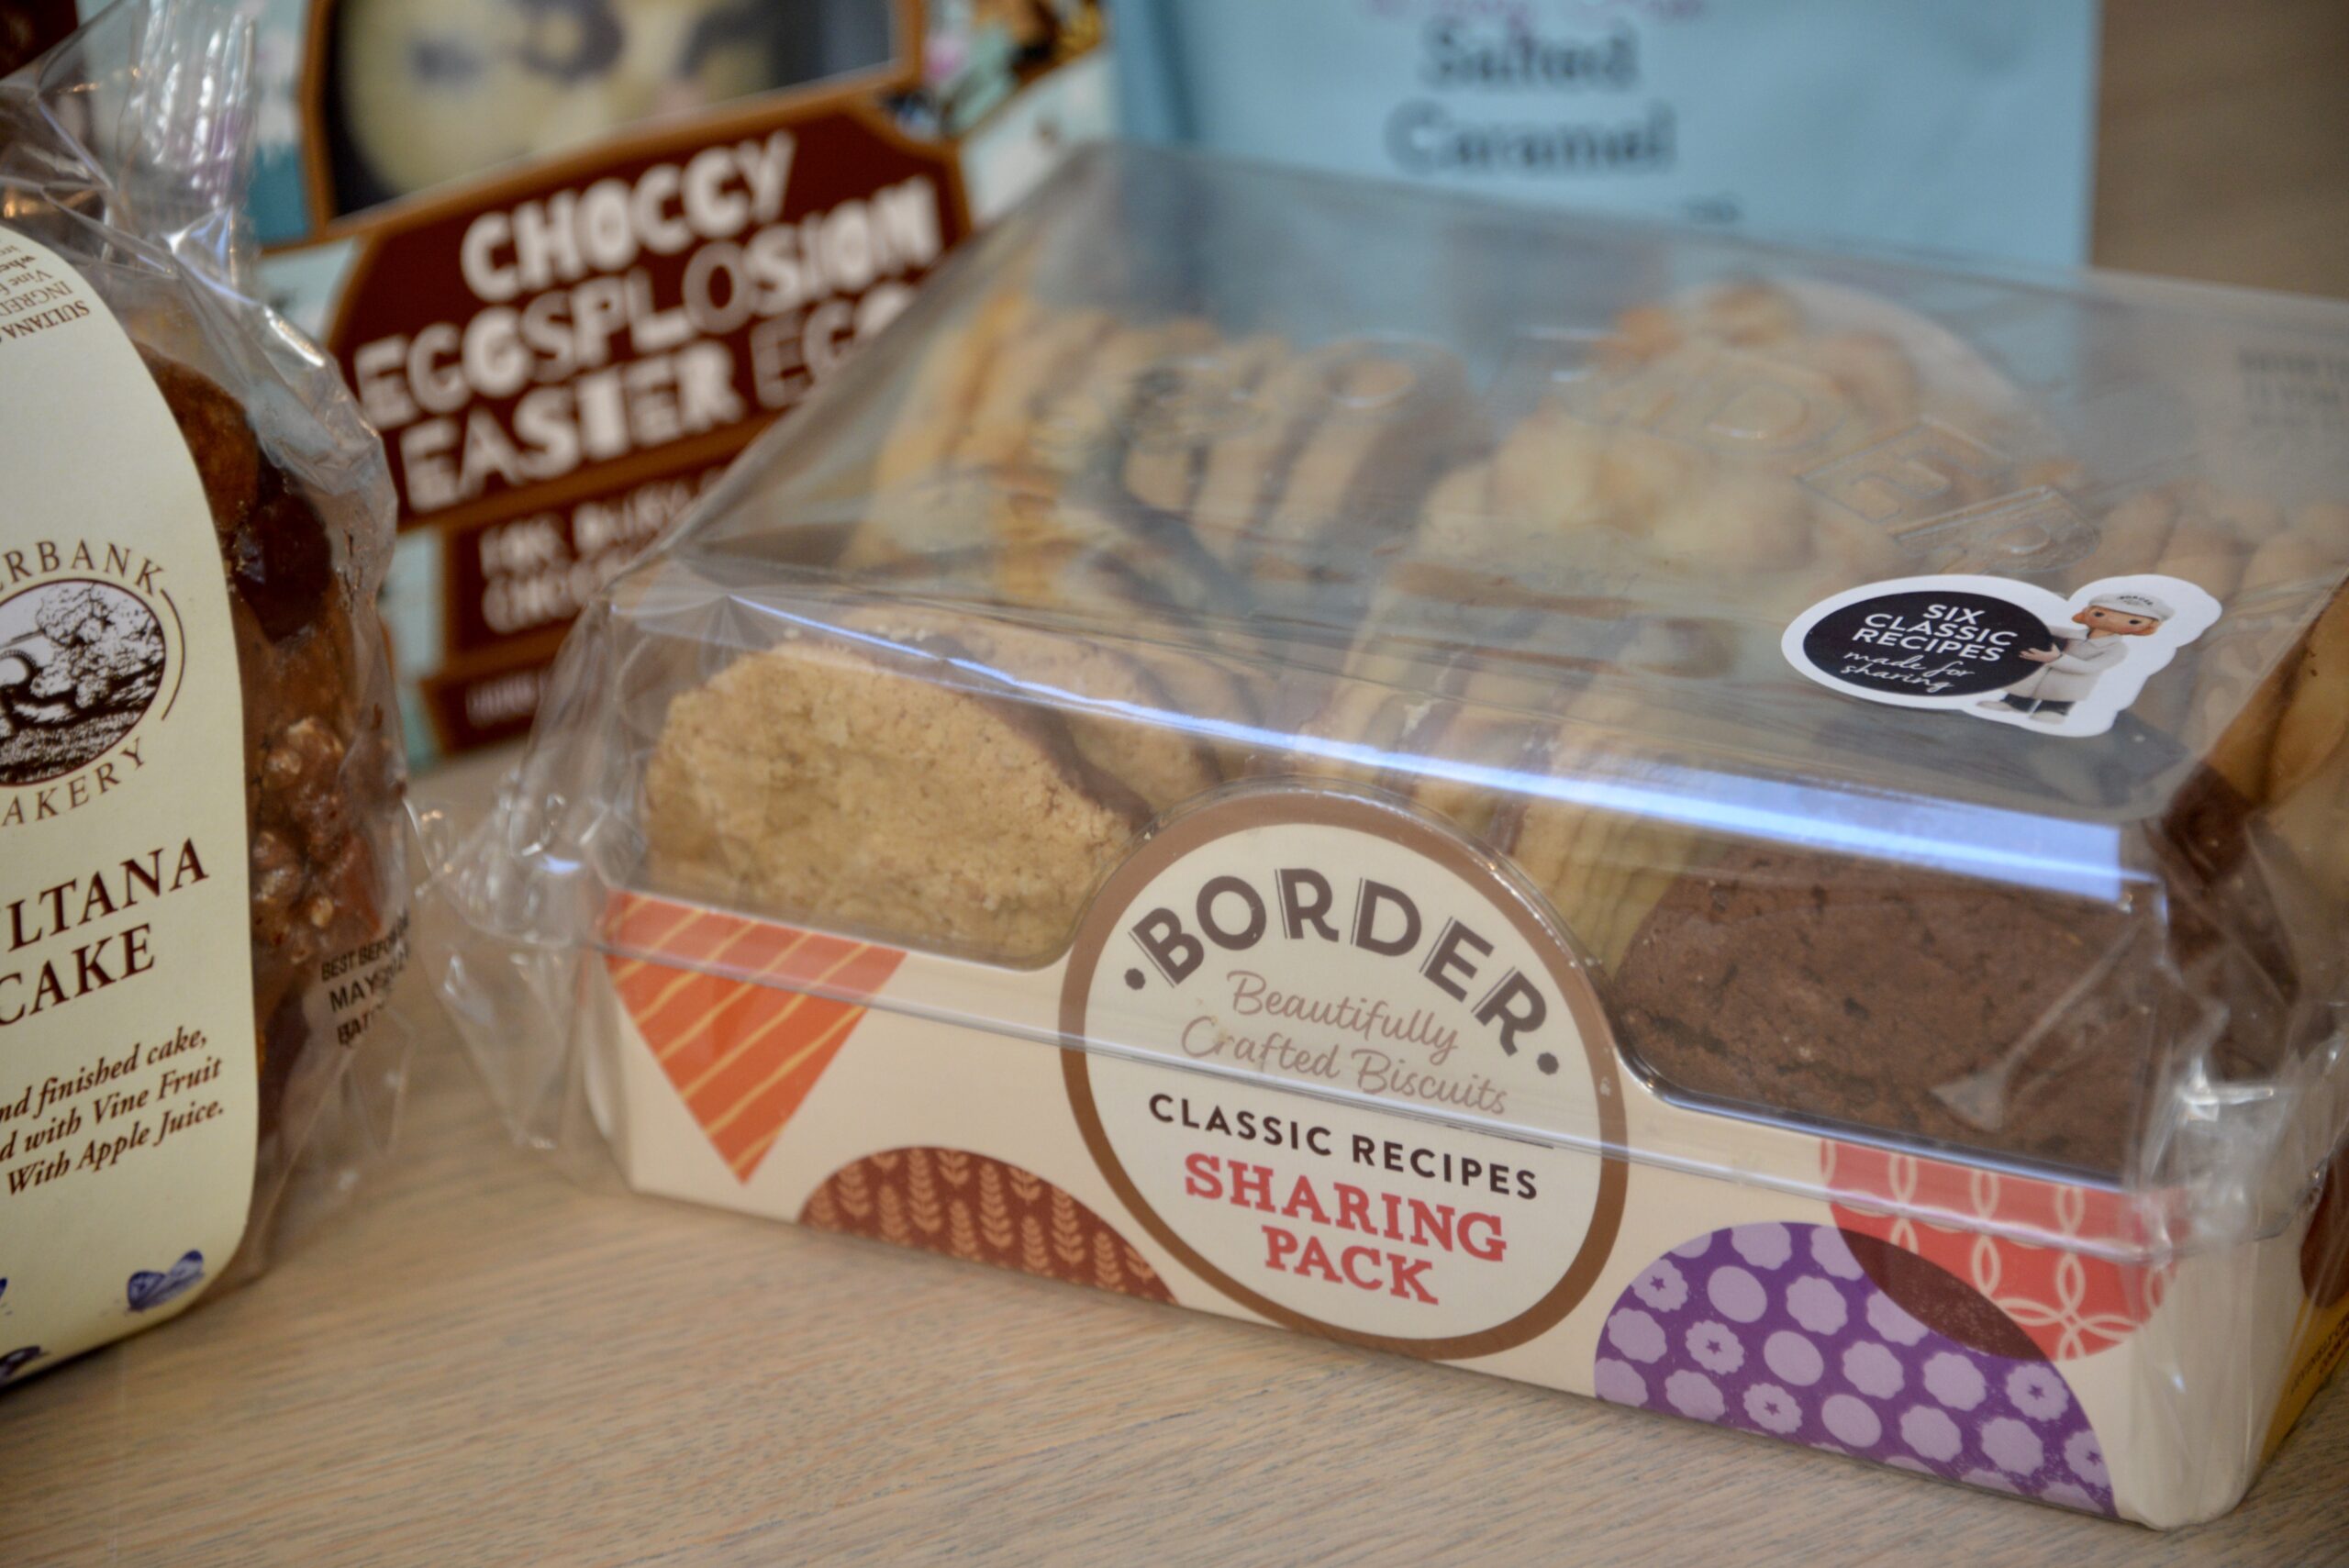 Border biscuits selection